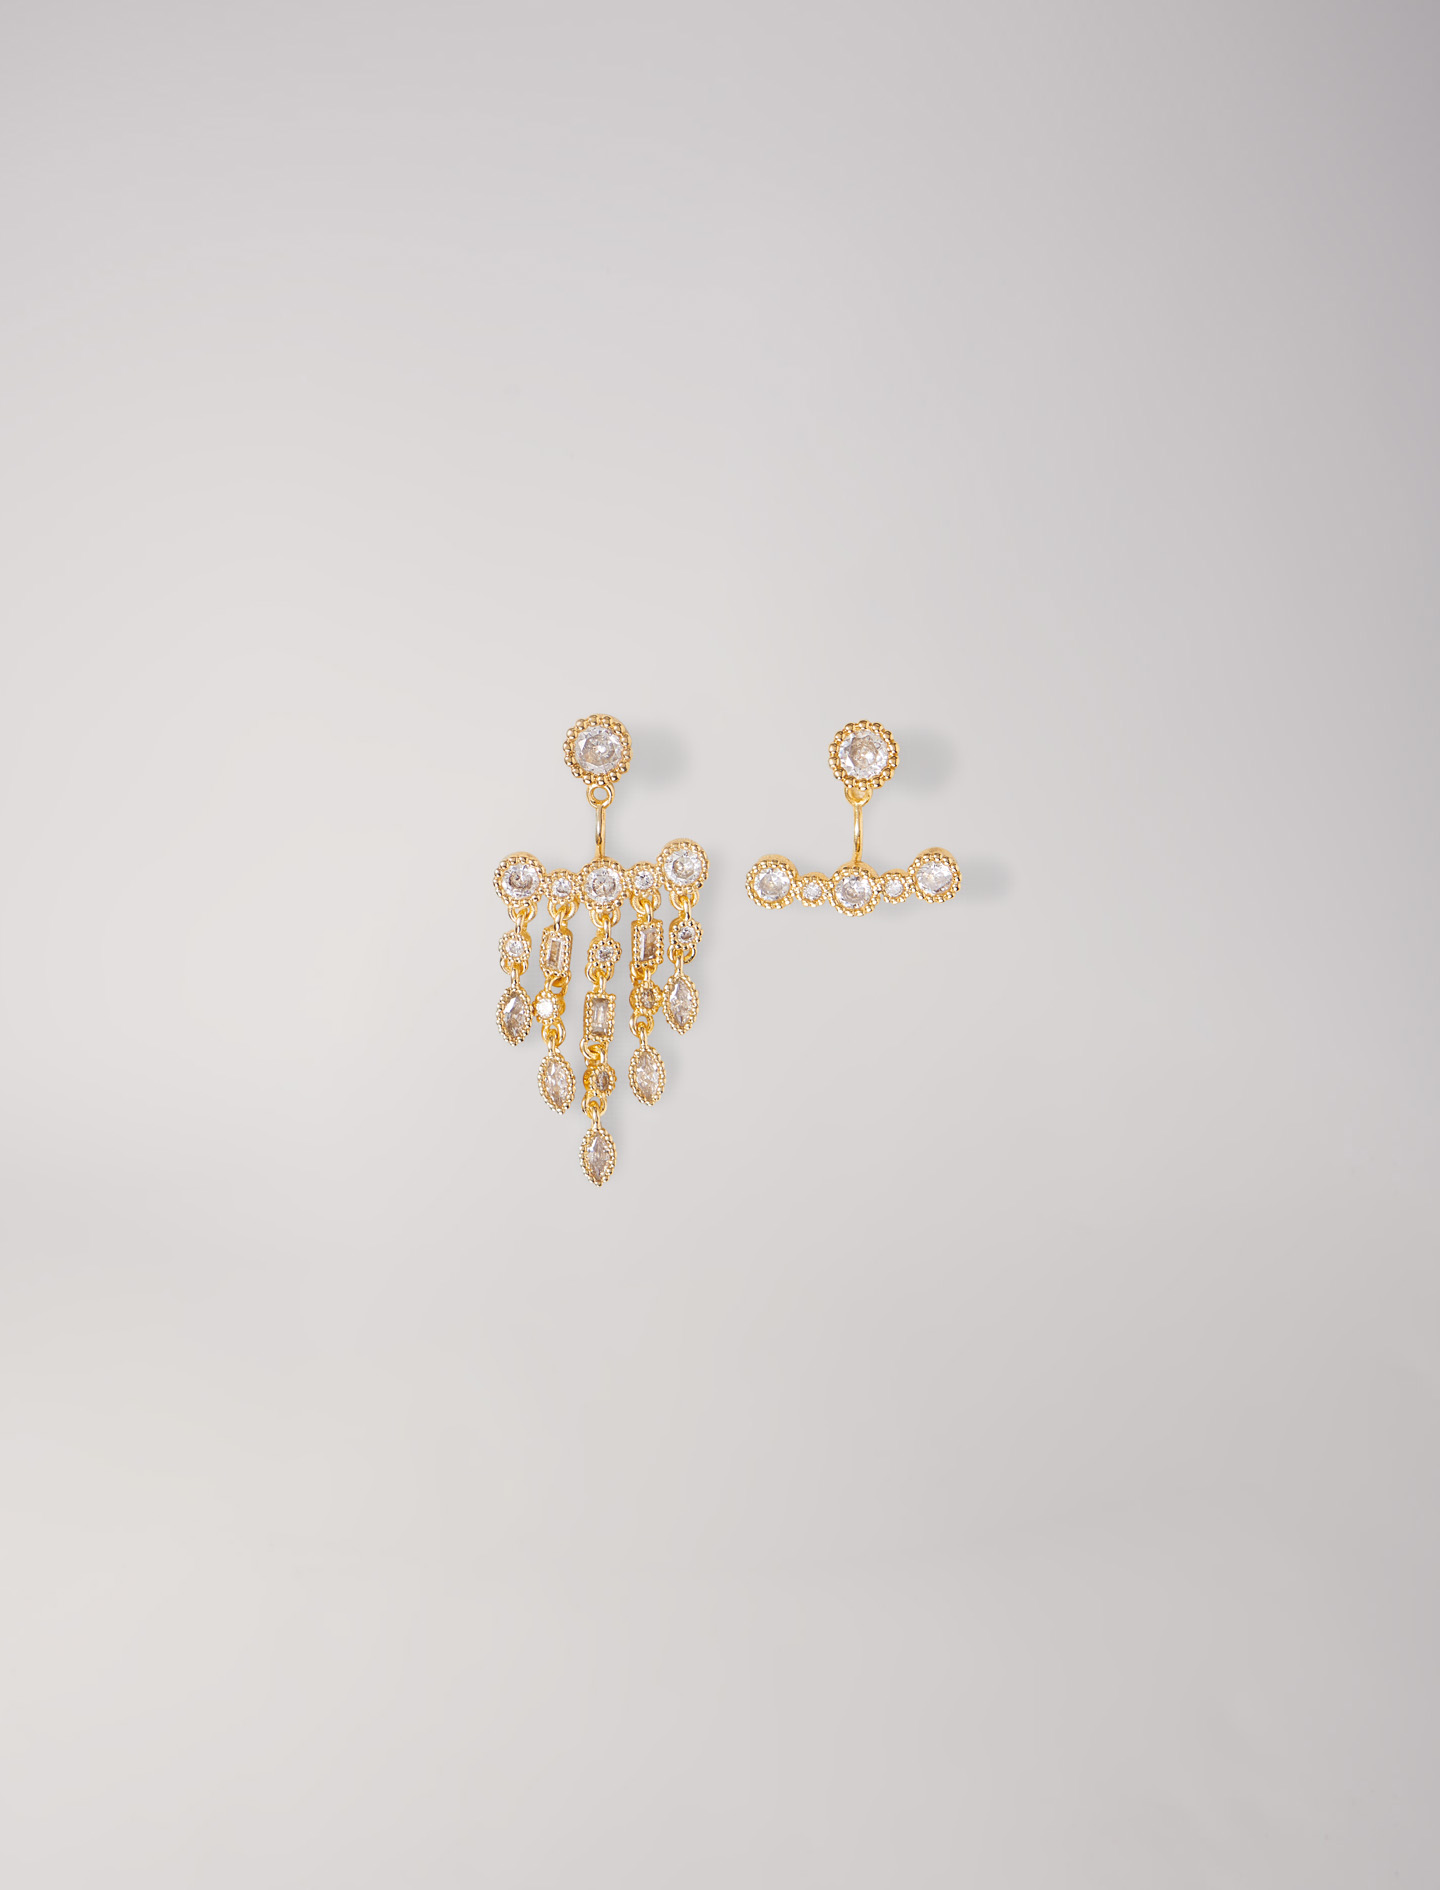 Woman's glass Jewellery: Asymmetric earrings for Spring/Summer, size Woman-All Styles-OS (ONE SIZE), in color Gold / Yellow